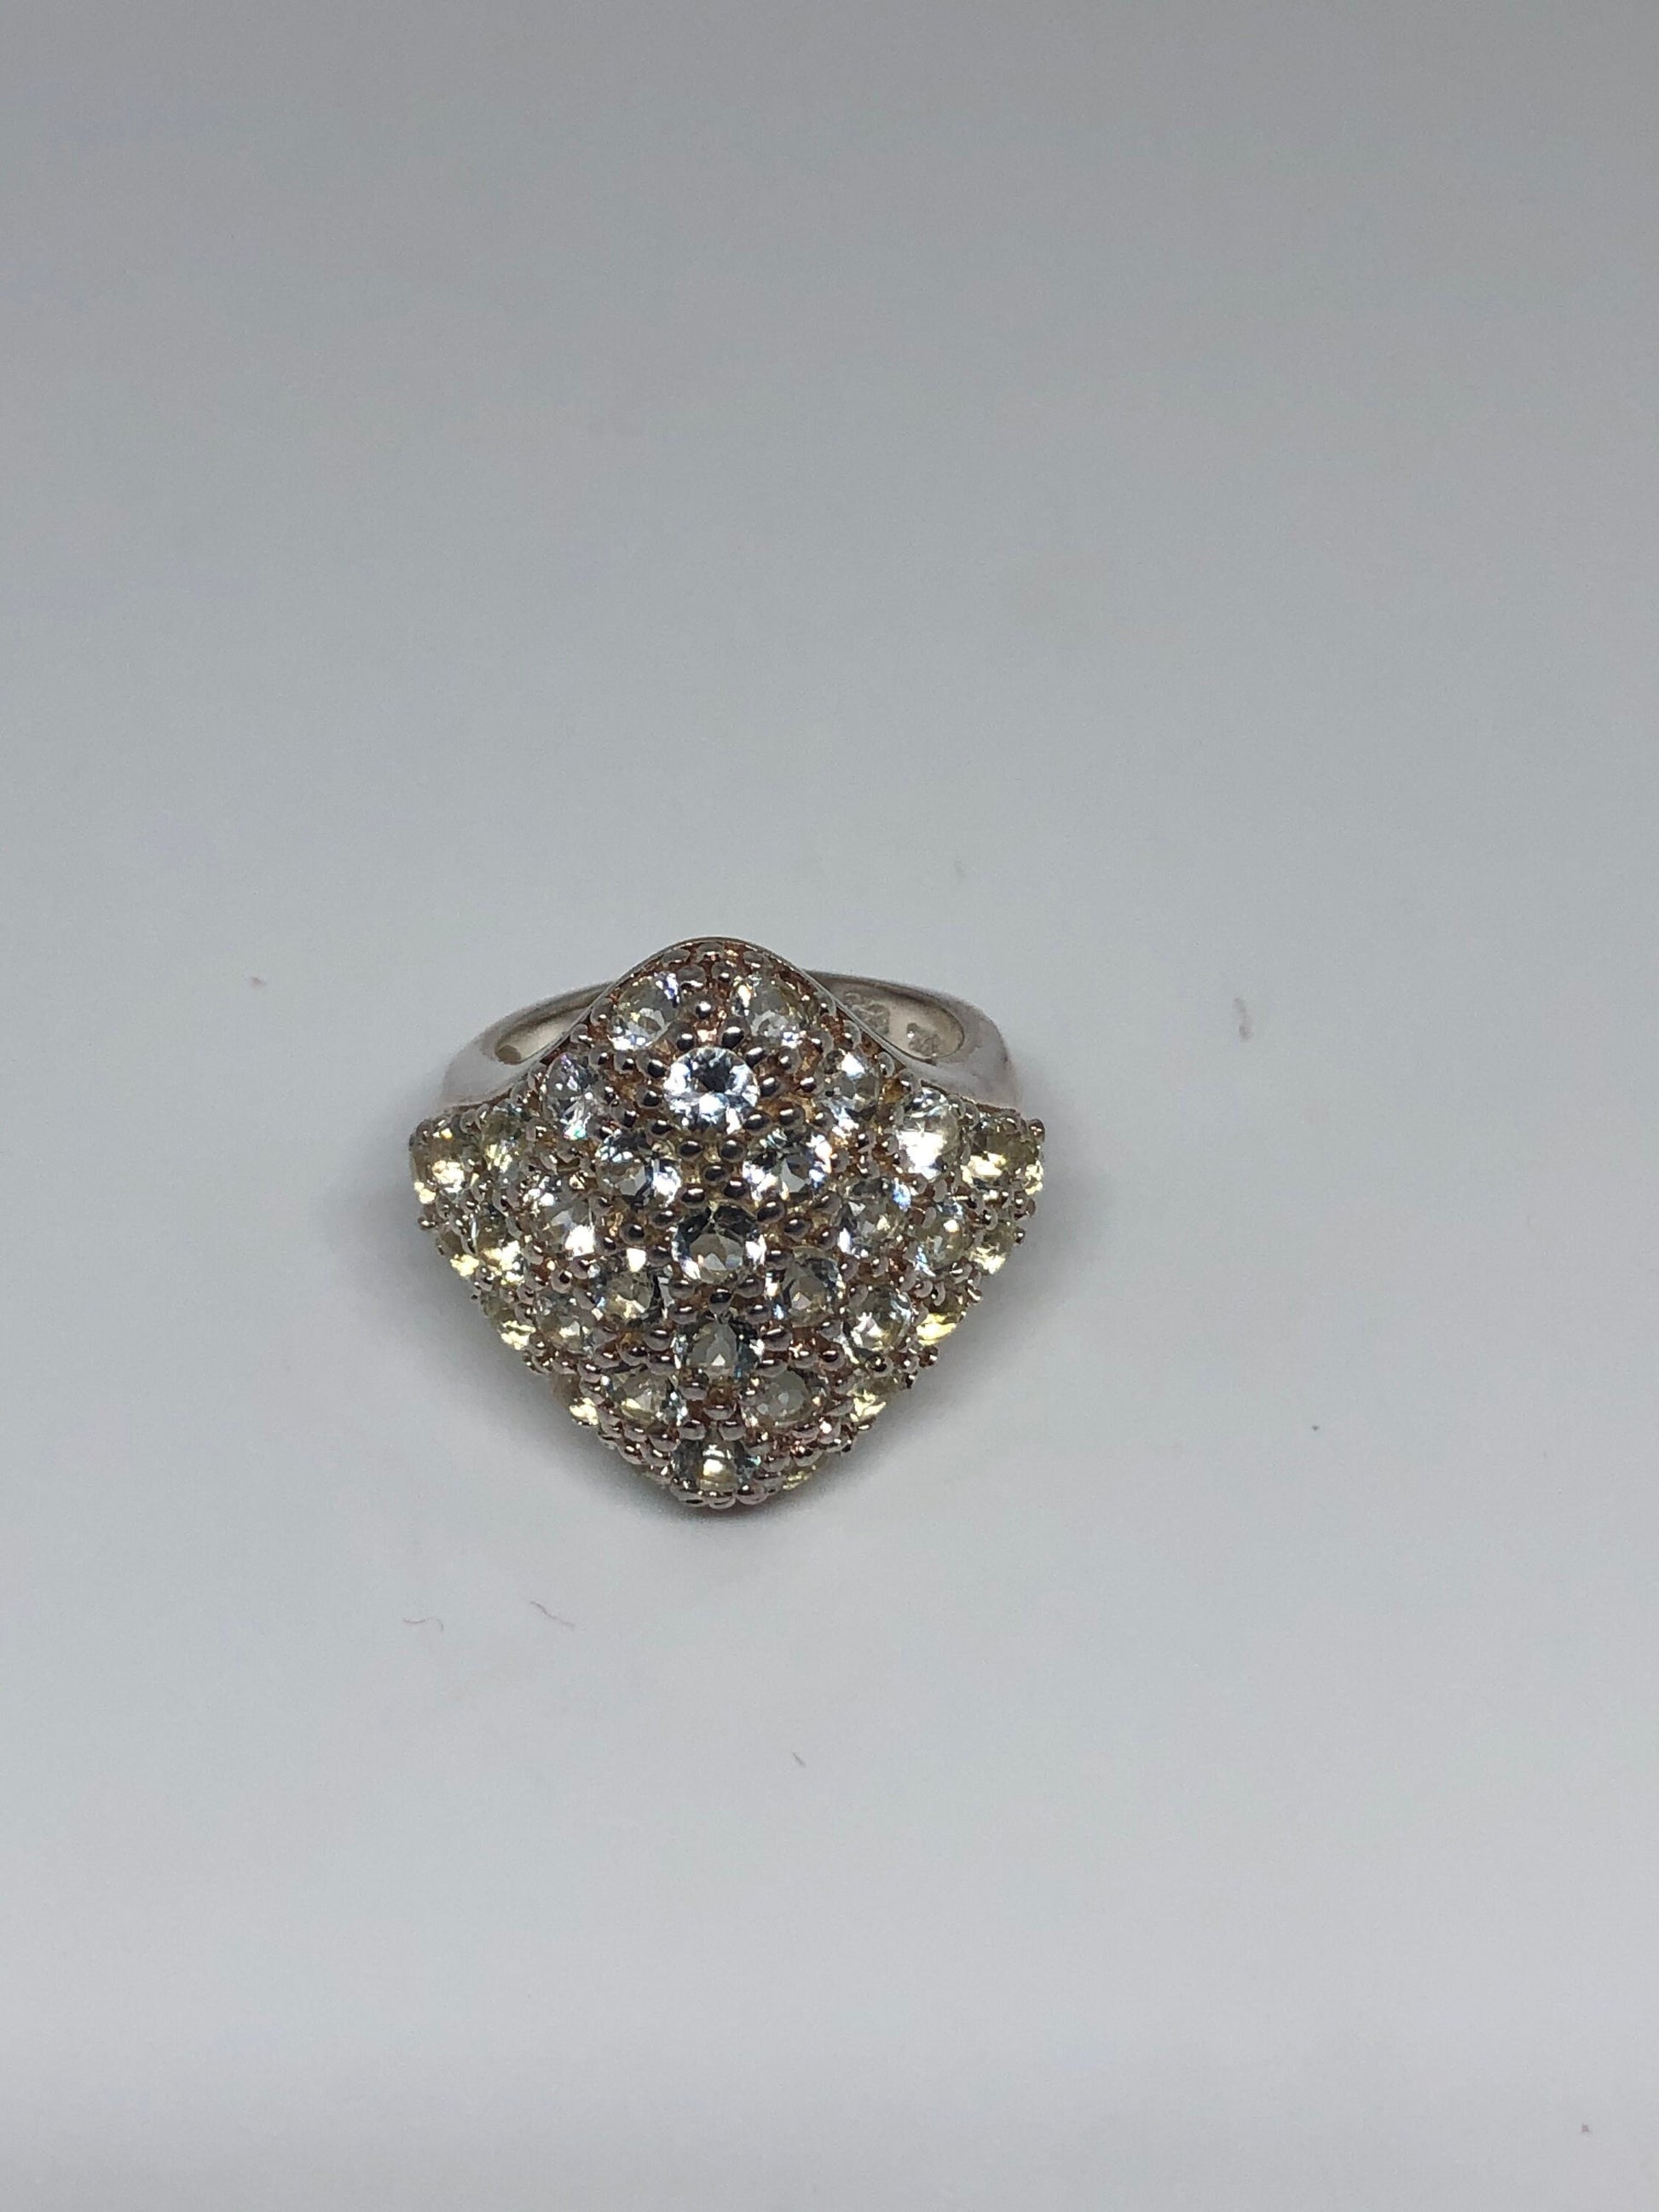 Vintage Clear White Sapphire 925 Sterling Silver Cocktail Ring Size 6.25